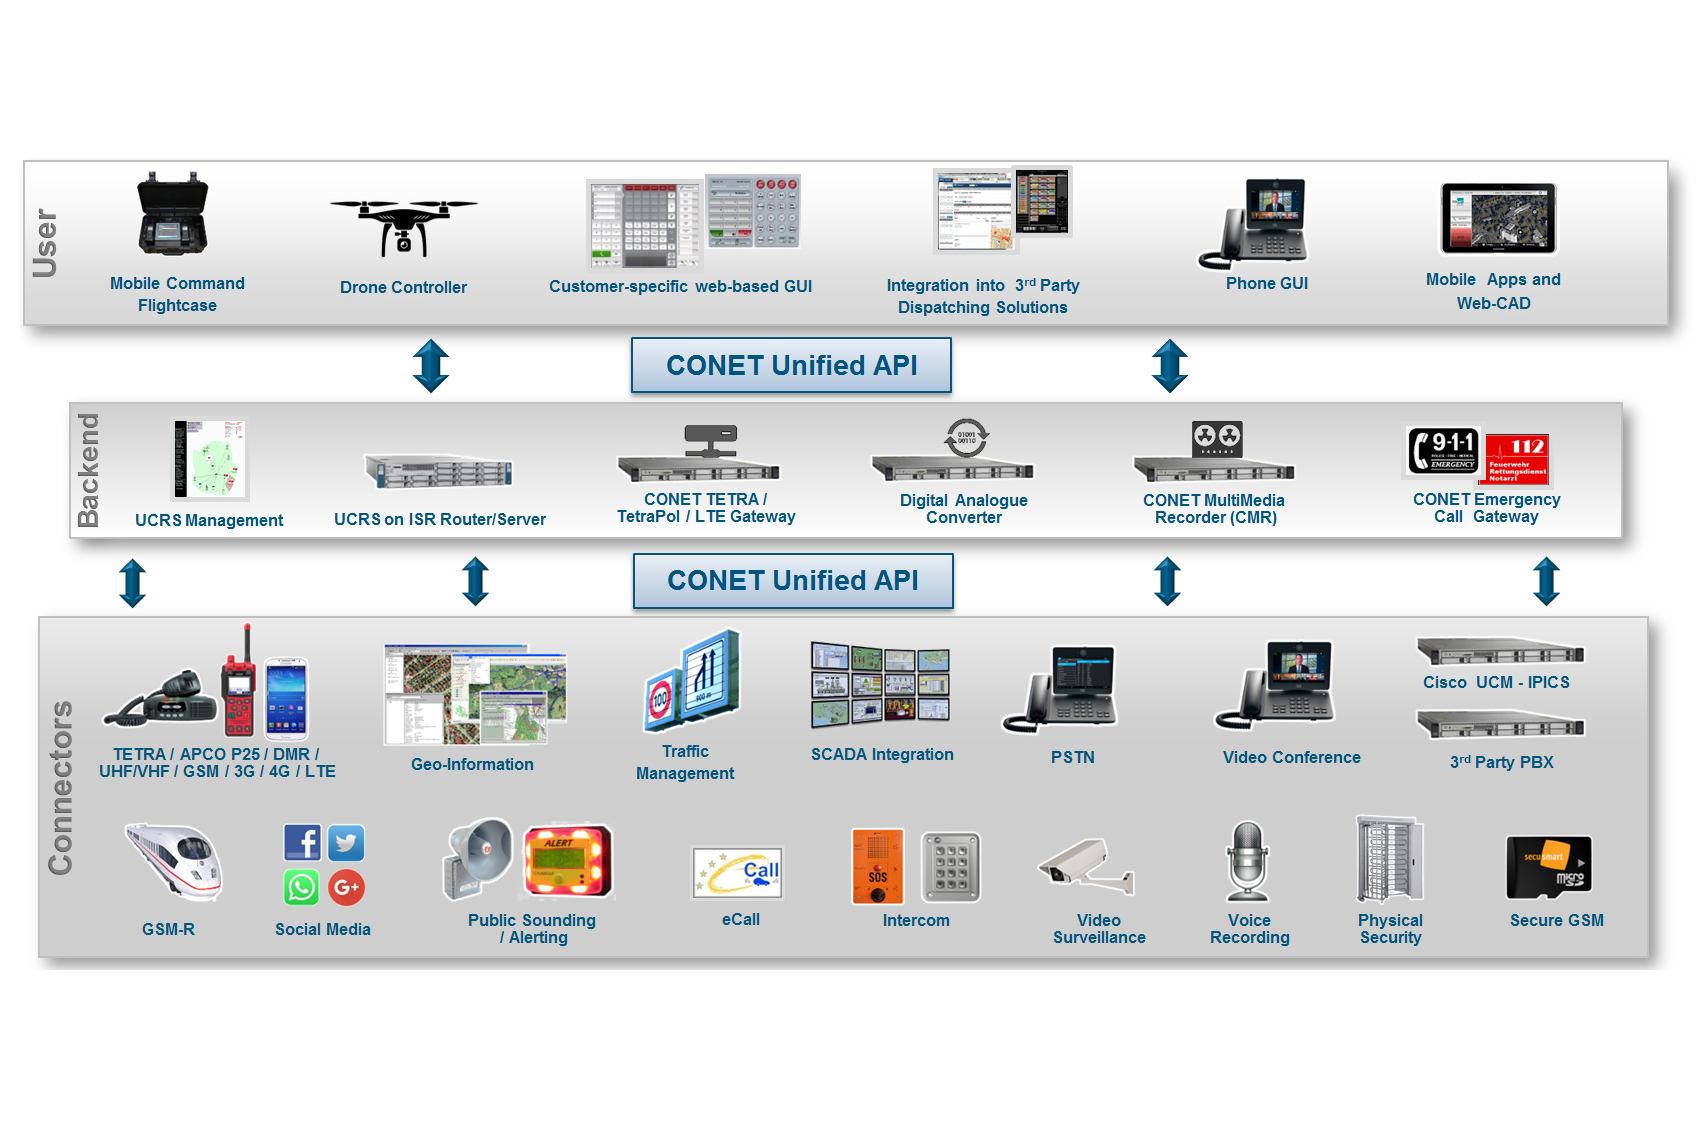 Illustration: Overview of components in the system architecture of CONET UC Radio Suite